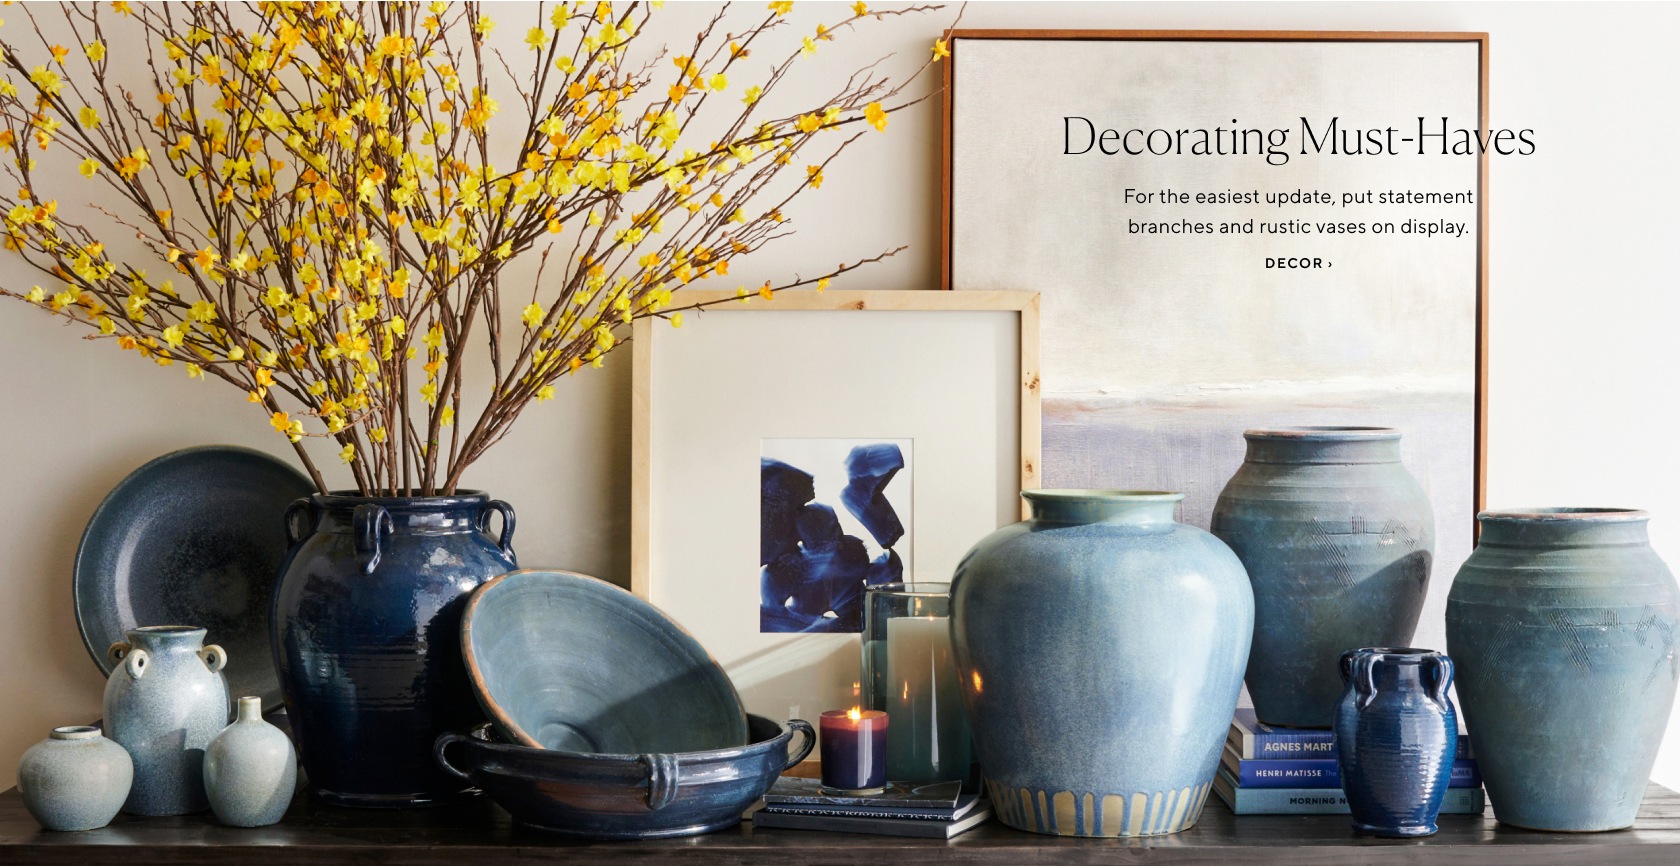 Decorating Must-Haves